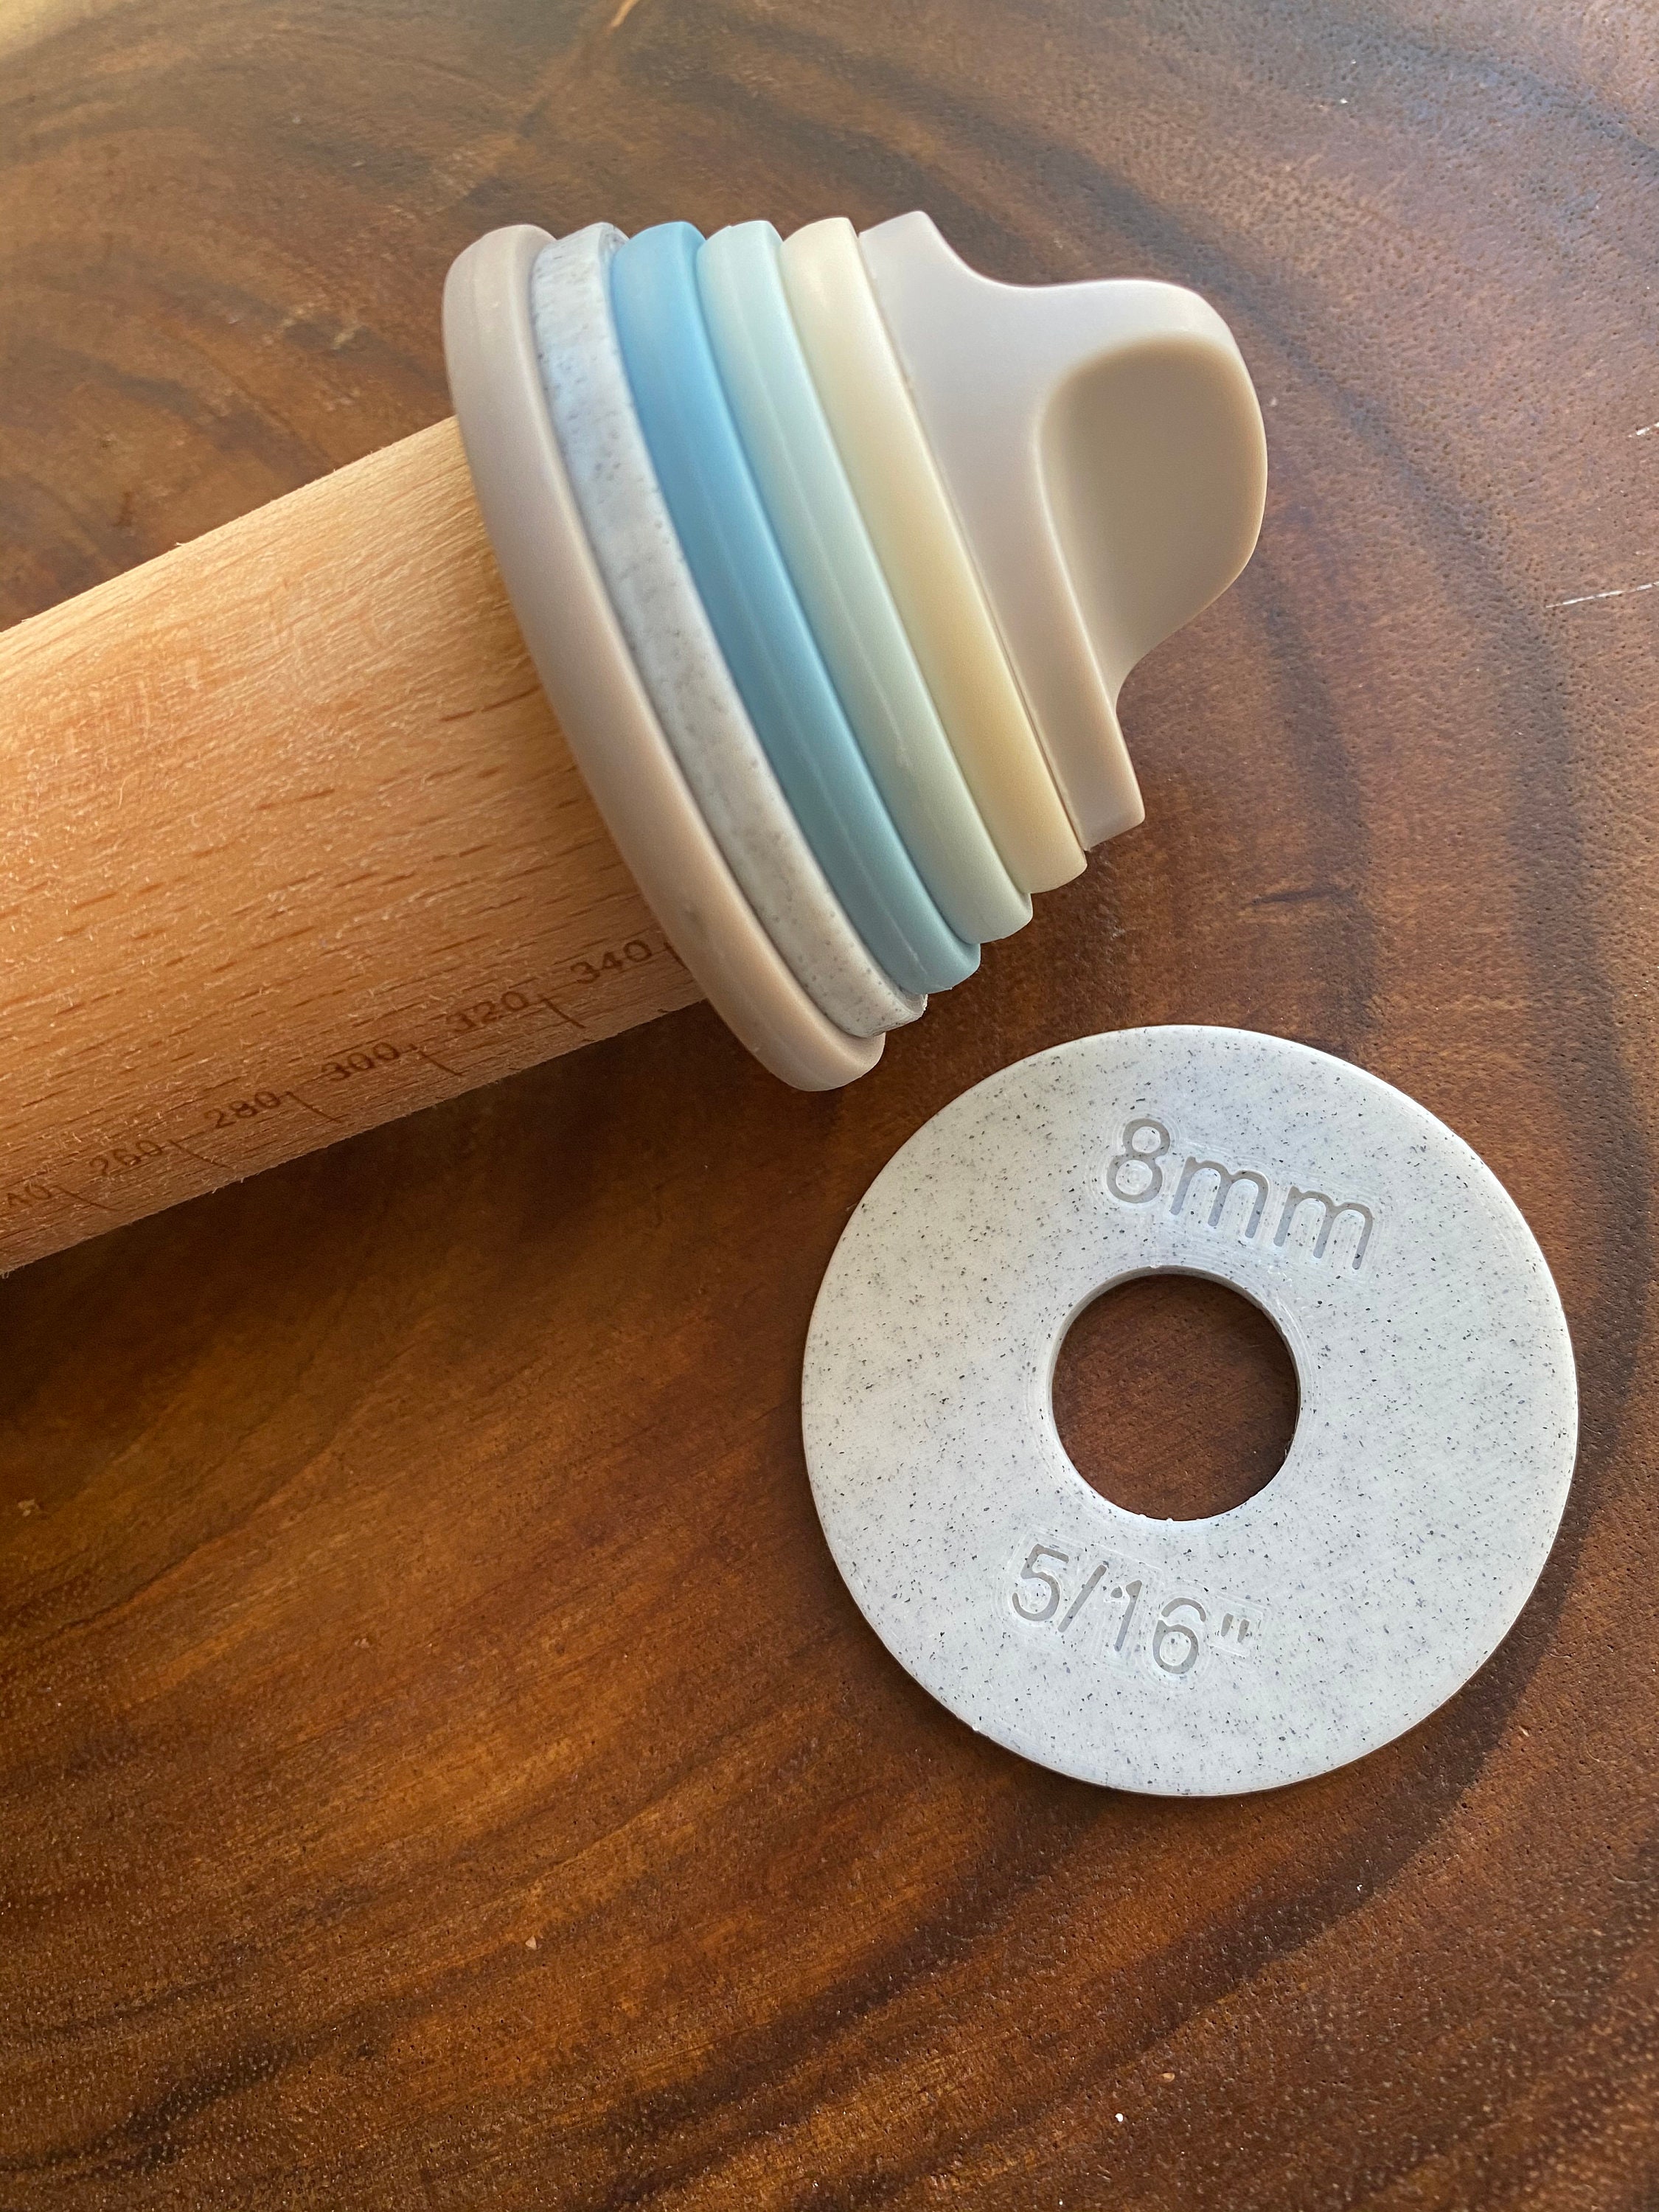 FAST SHIPPING Adjustable Rolling Pin, Bakers Rolling Pin, Precision Rolling  Pin, Fondant Rolling Pin, Cookie Rolling Pin 